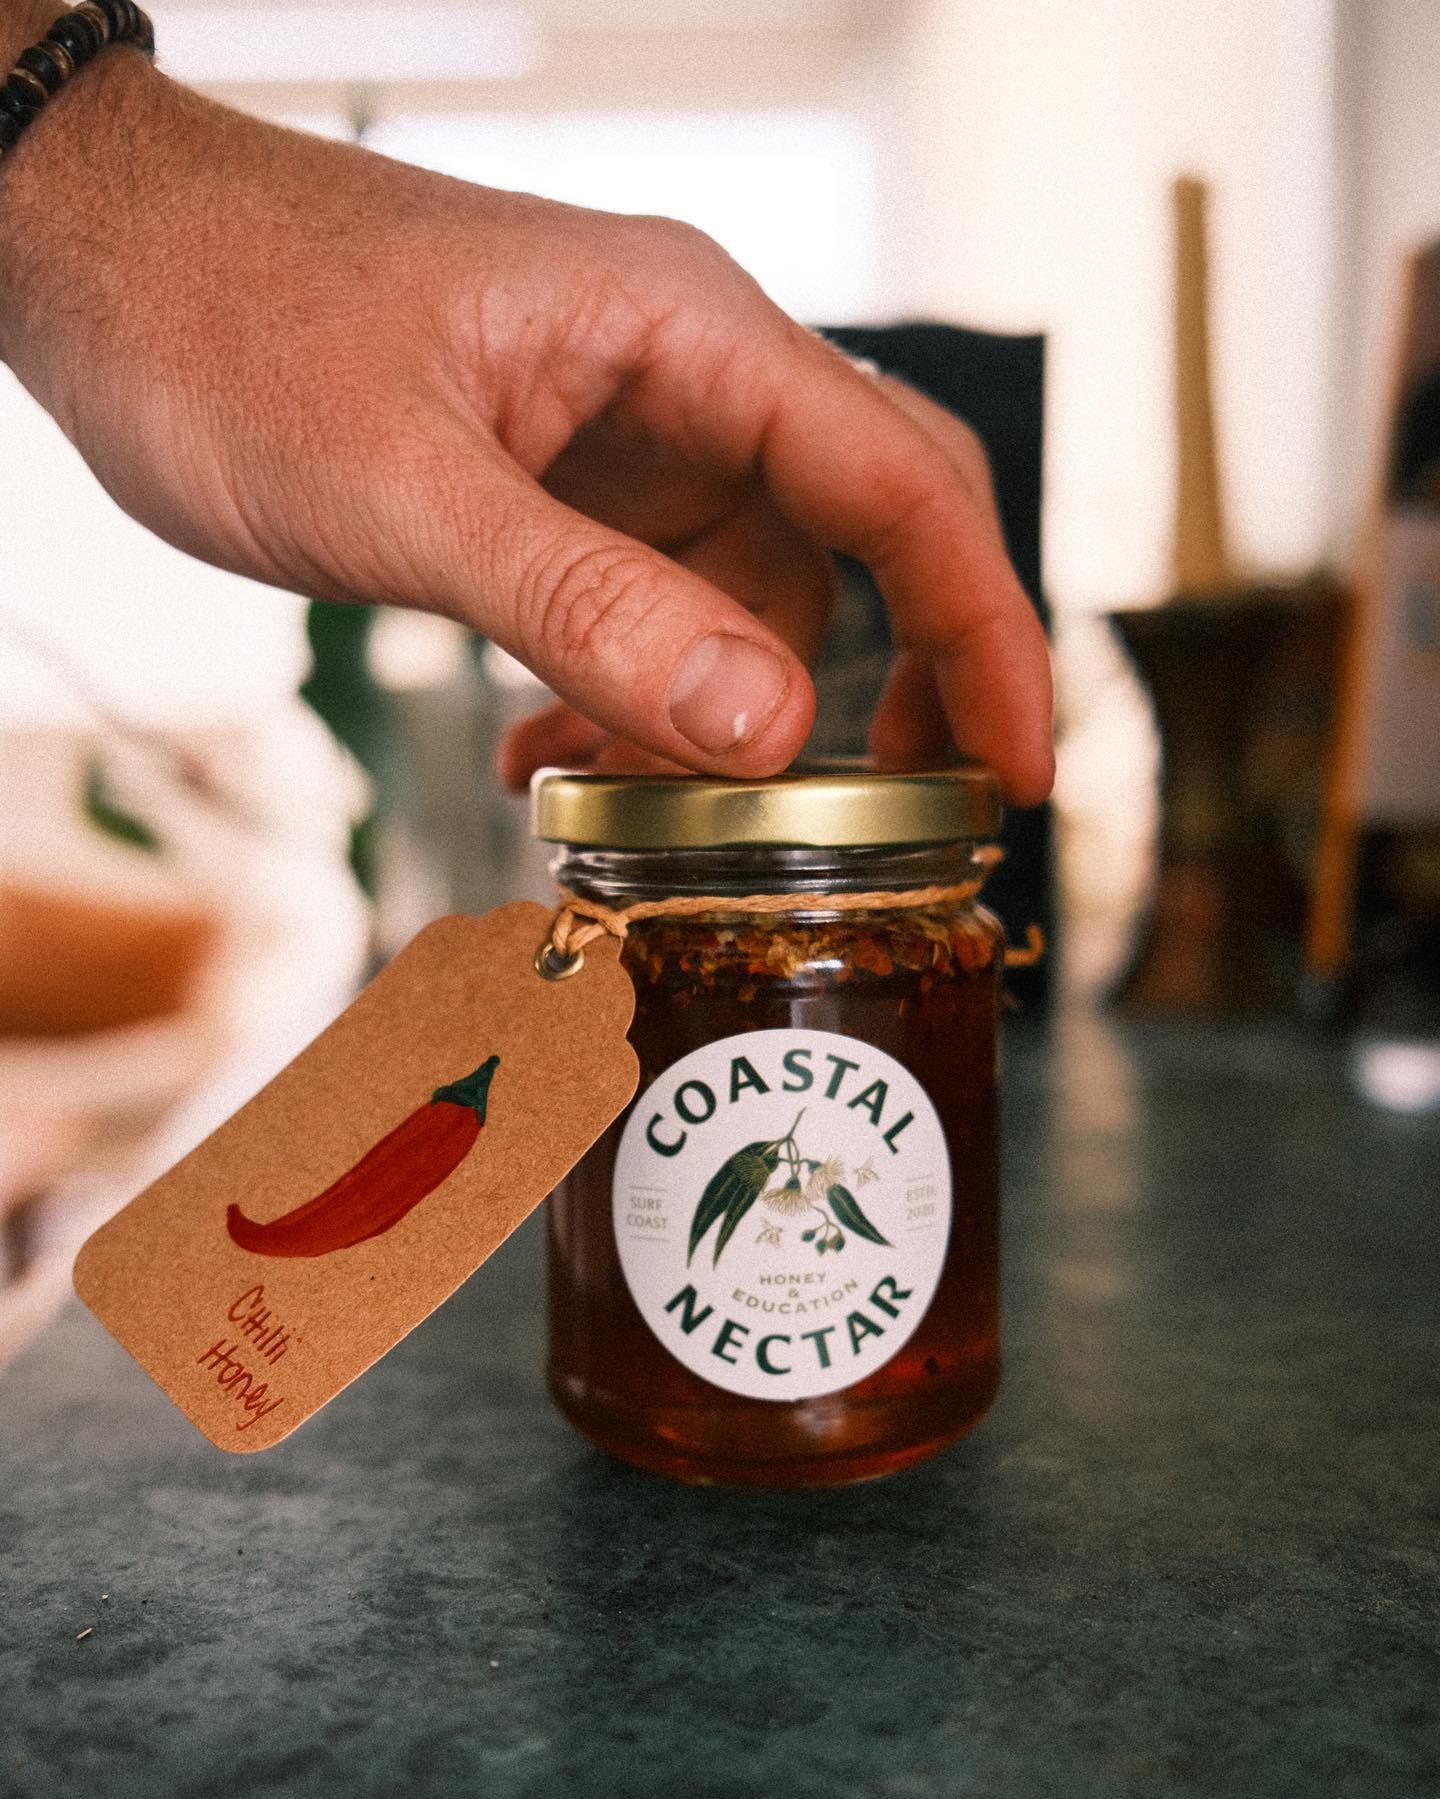 CHILLI HONEY 🌶

After a successful trial batch with friends and family, we&rsquo;ve decided to release a micro batch of chilli honey

This spicy new addition adds a delicious flavour when drizzled over baked veggies, stir-fries, fish and even a spoo